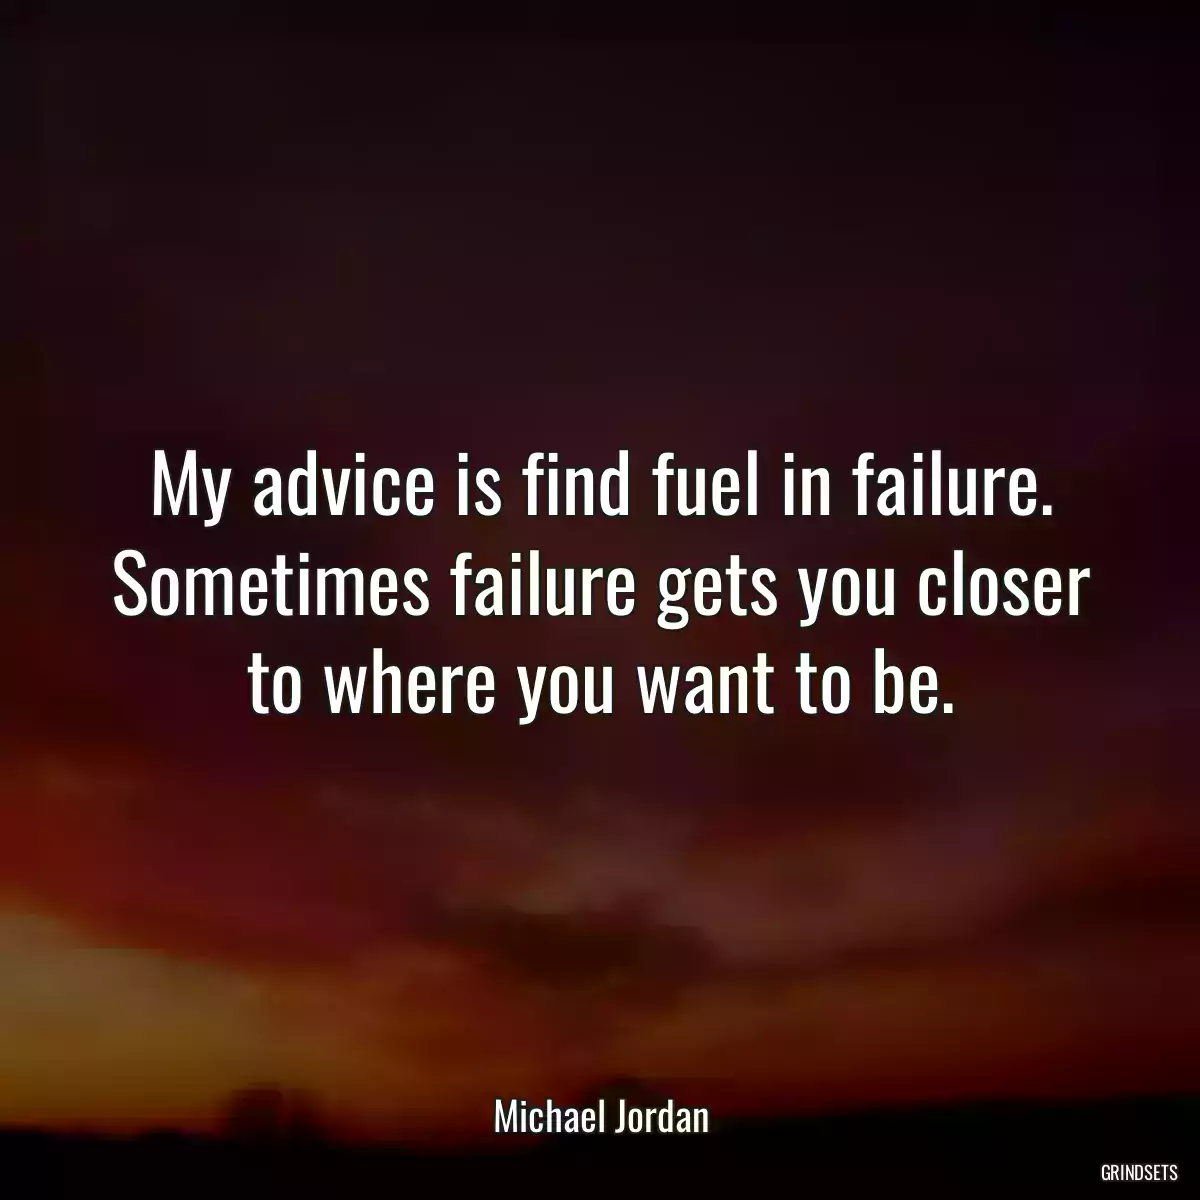 My advice is find fuel in failure. Sometimes failure gets you closer to where you want to be.